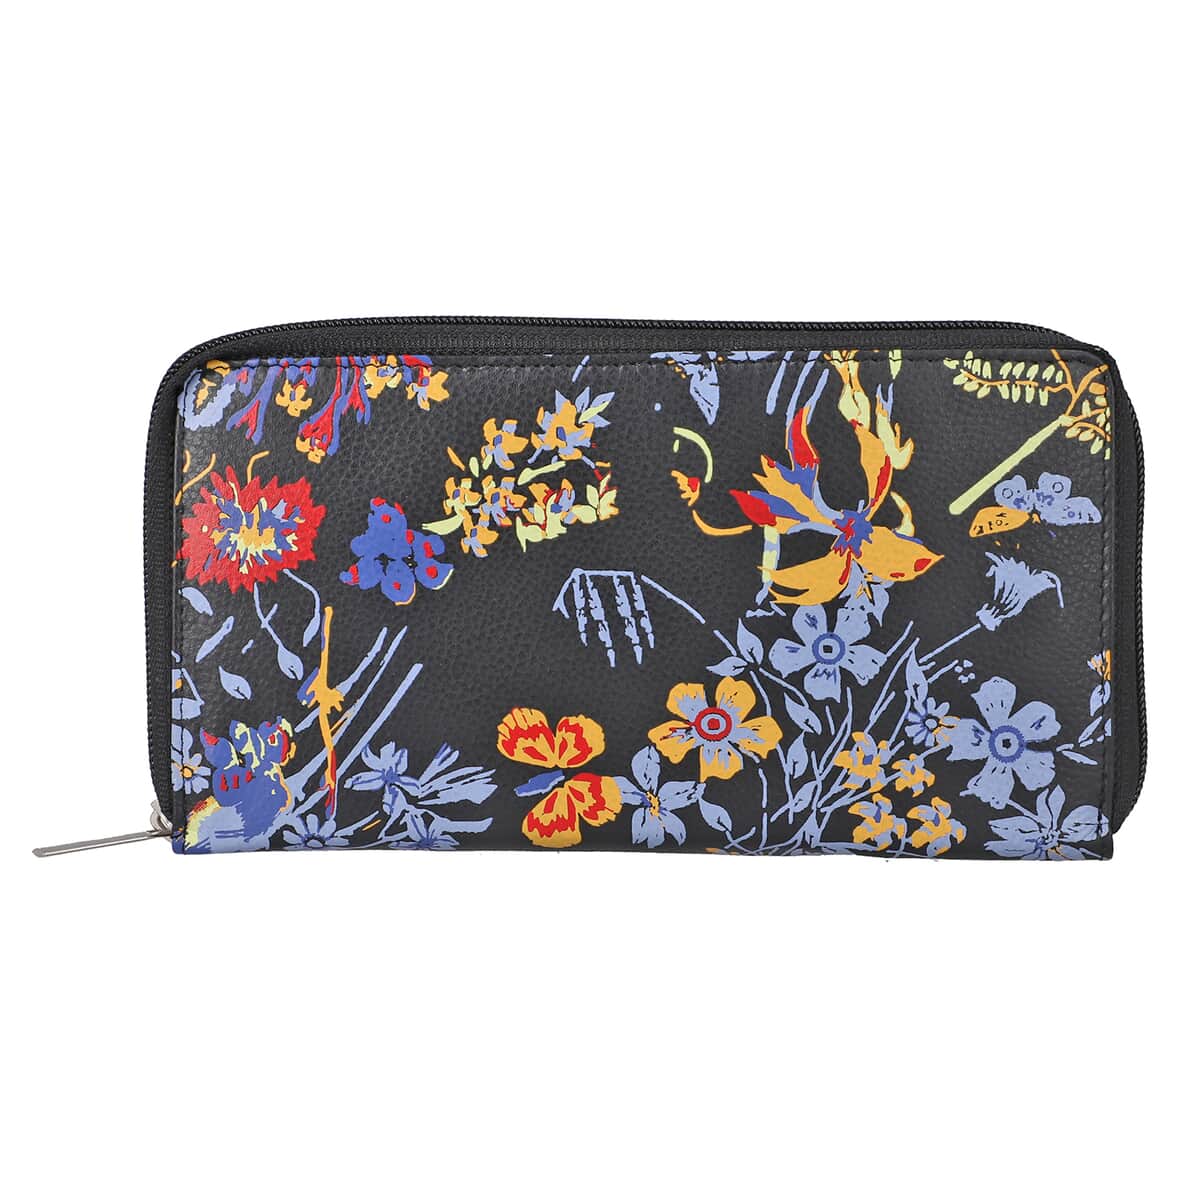 "UNION CODE -RFID Protected 100% Genuine Leather Women's Wallet THEME: Flower print  SIZE: 7.5(L)x4.5(W)x0.5(H) inches COLOR: Black " image number 0